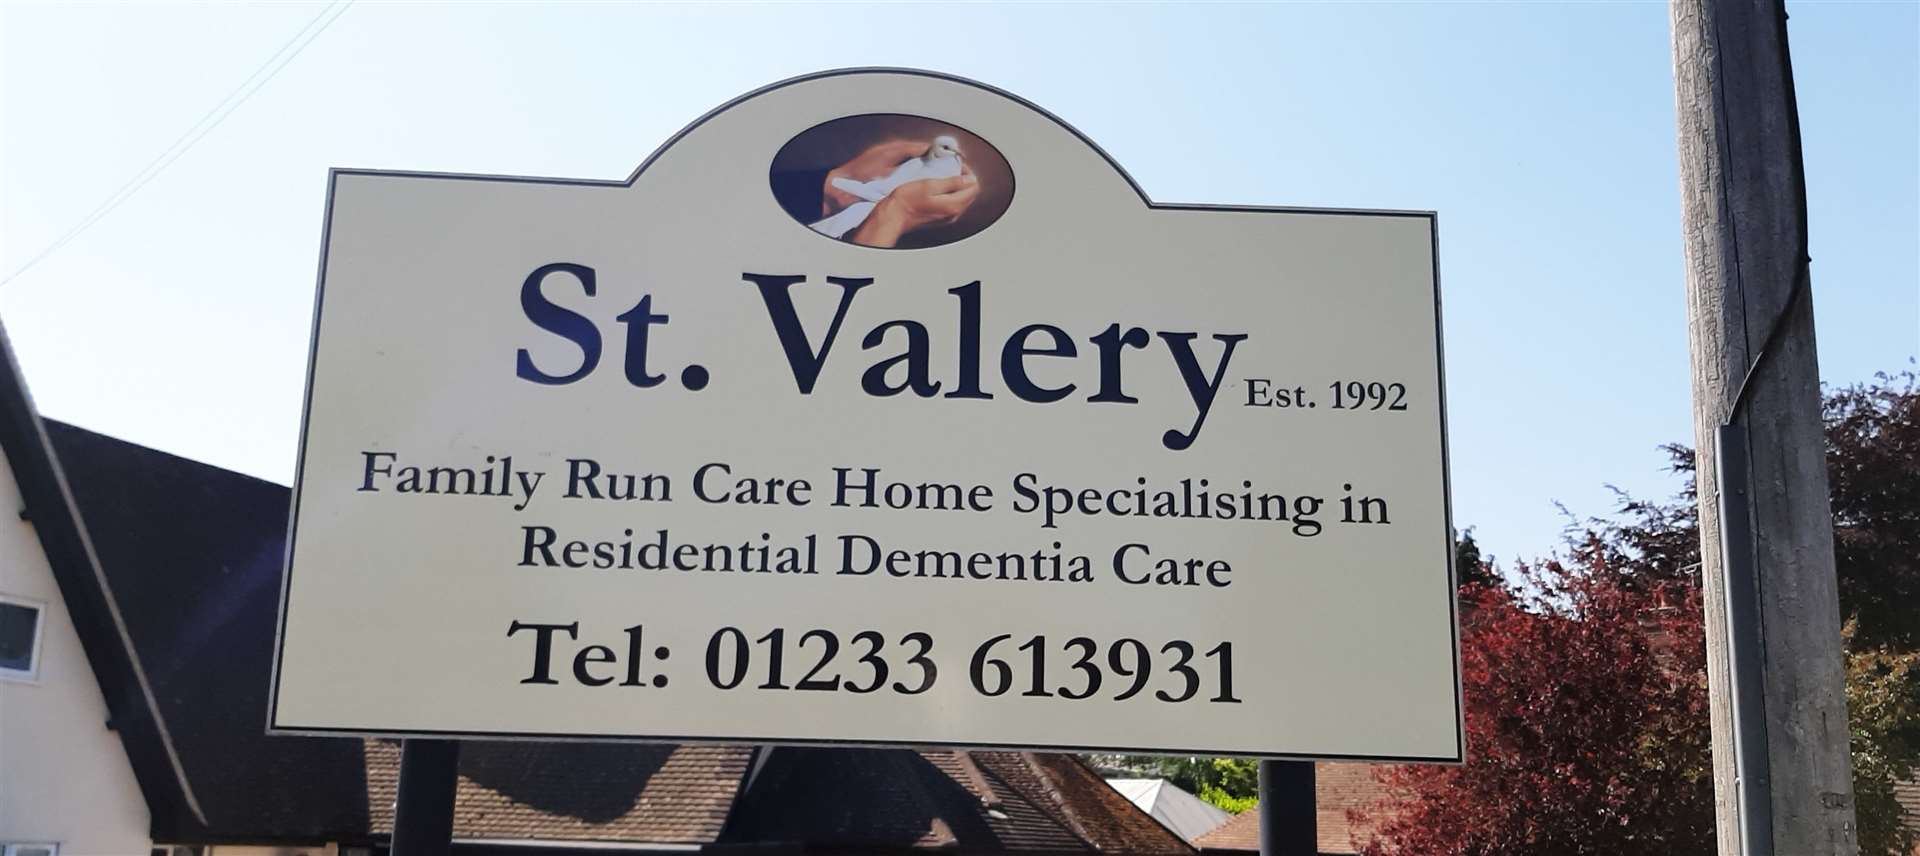 St Valery is set to fully close in the coming days